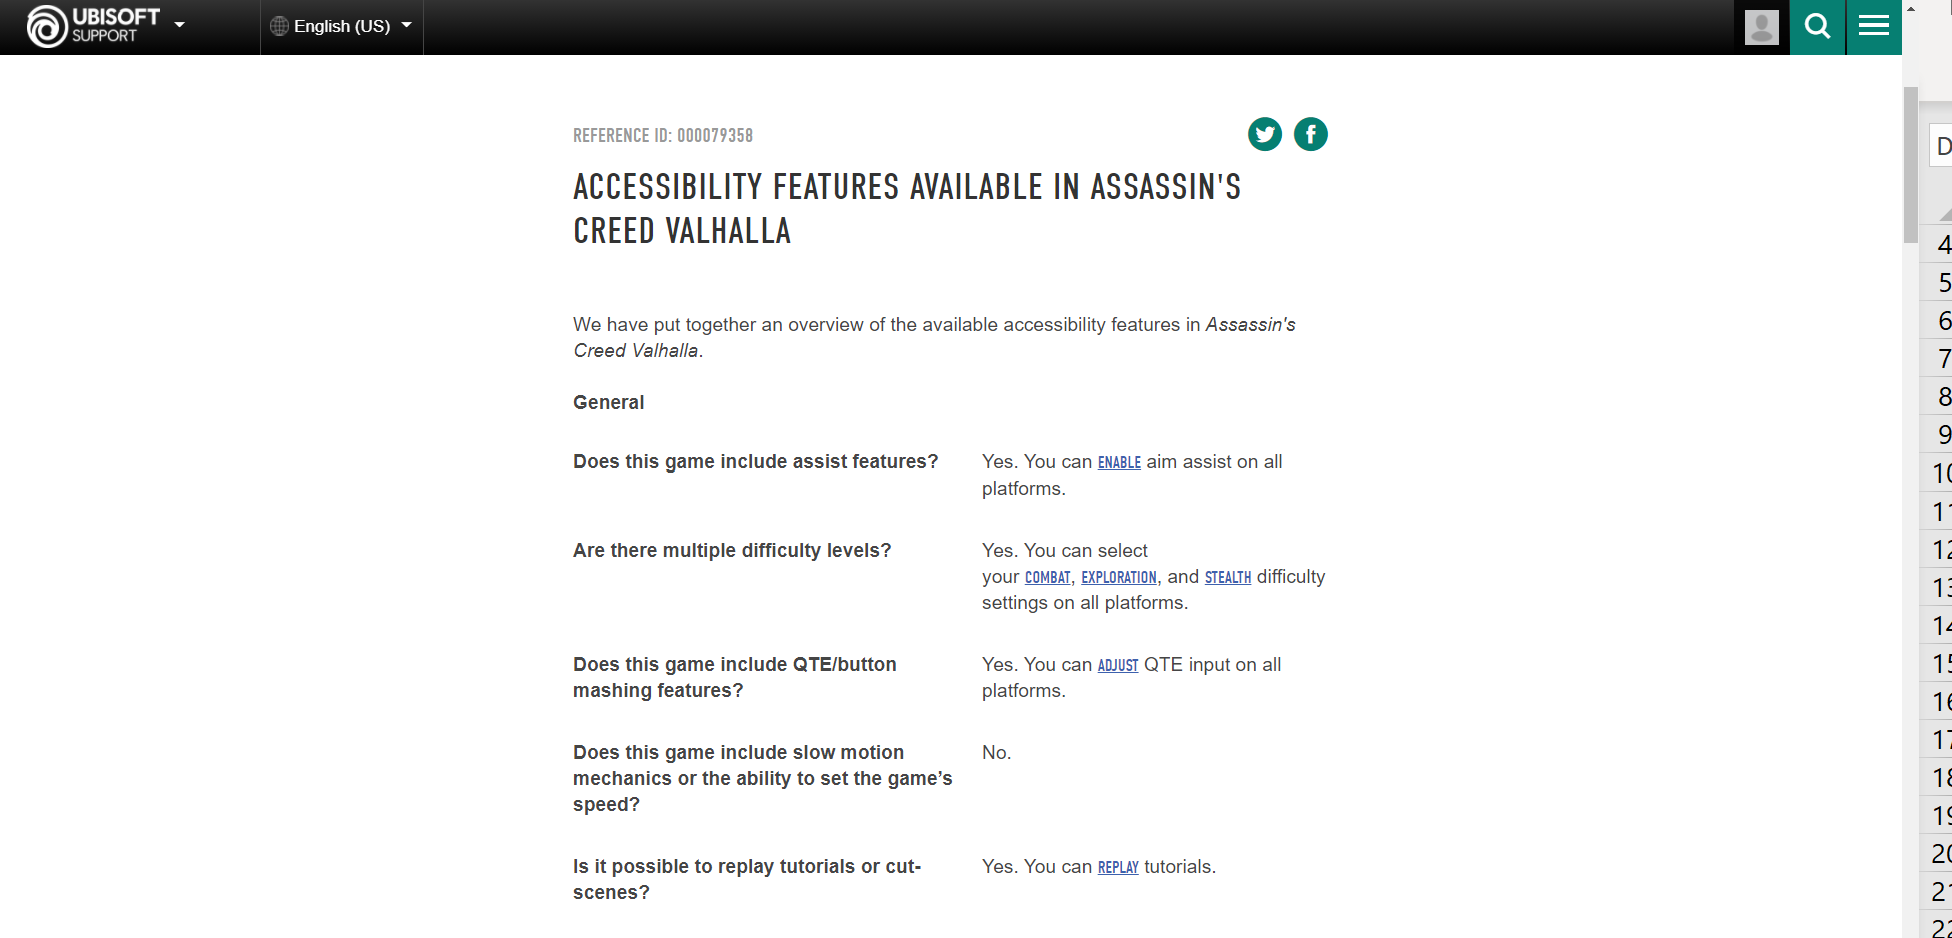 A screenshot of Assassin's Creed Valhalla's high-level accessibility documentation on Ubisoft's website. 